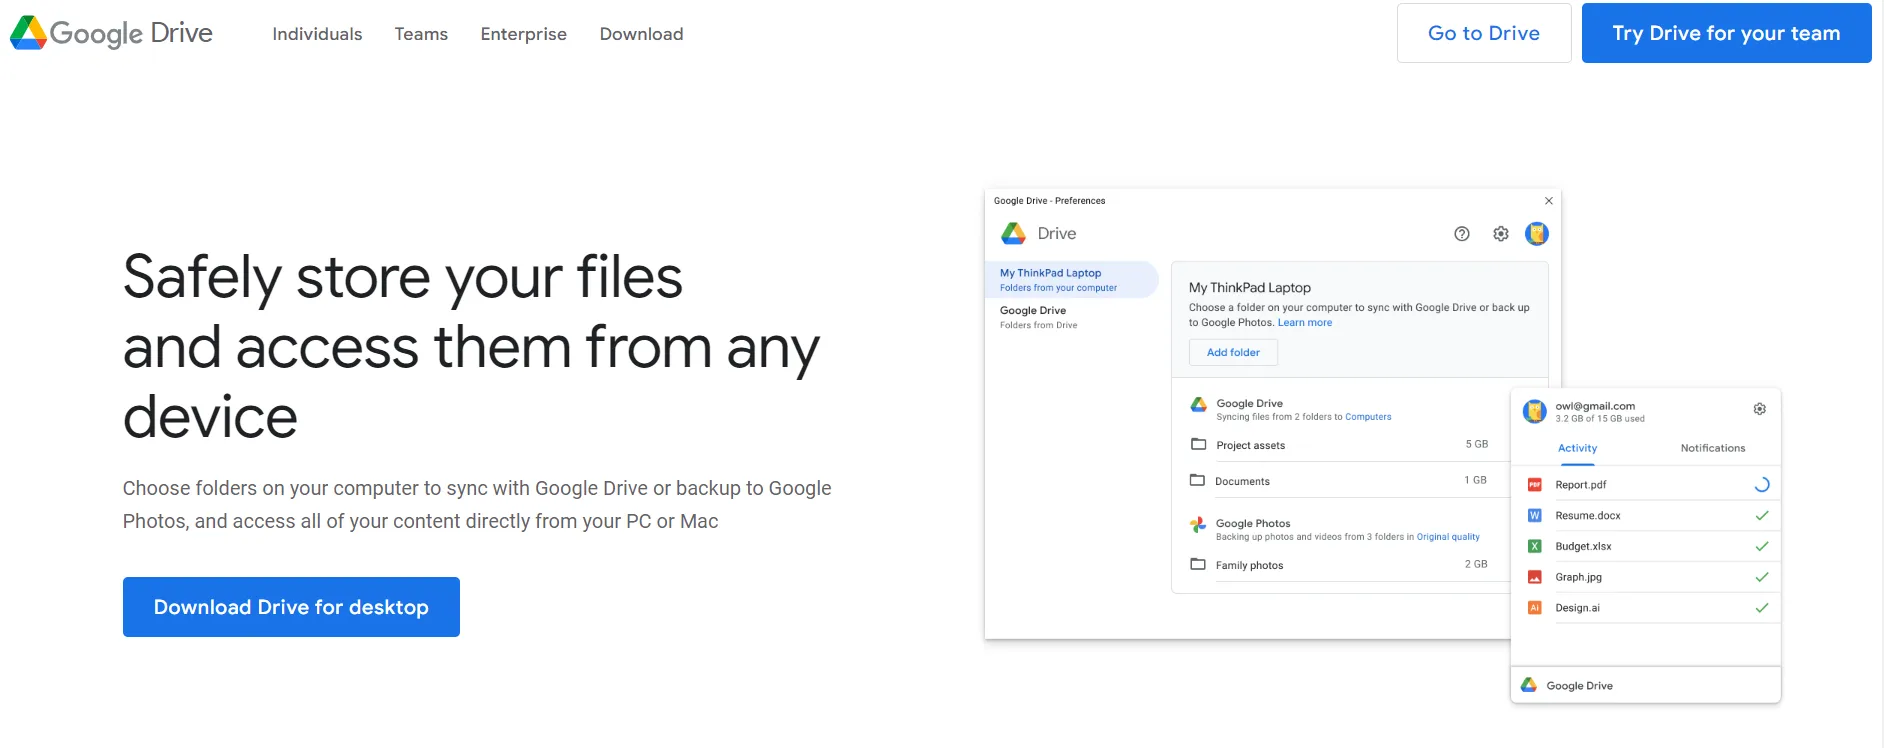 Transfer Ownership of Google Drive Files